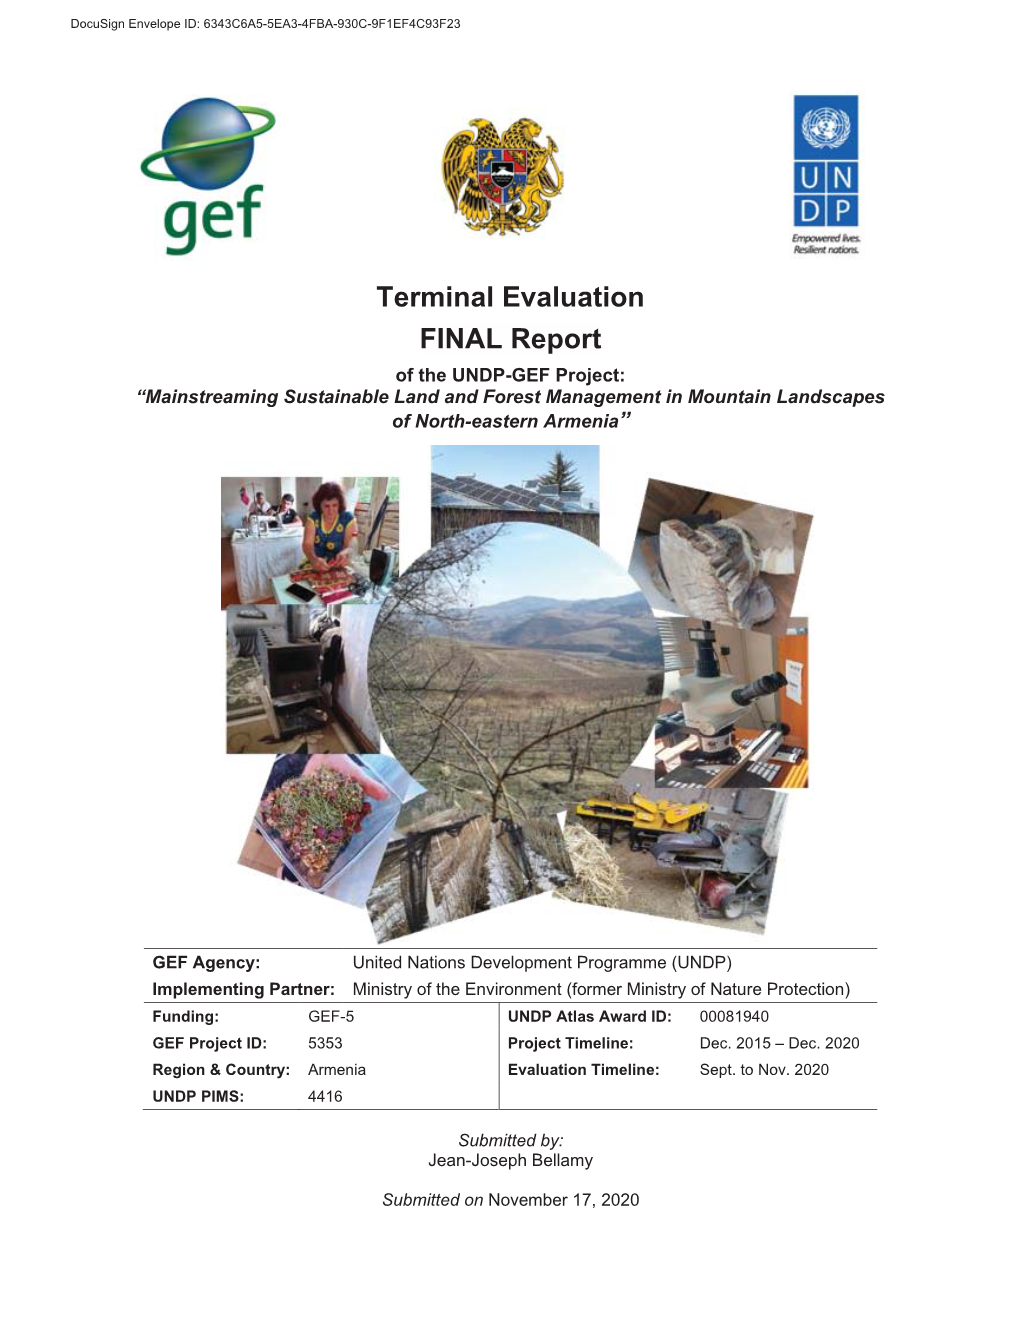 Terminal Evaluation FINAL Report of the UNDP-GEF Project: “Mainstreaming Sustainable Land and Forest Management in Mountain Landscapes of North-Eastern Armenia”